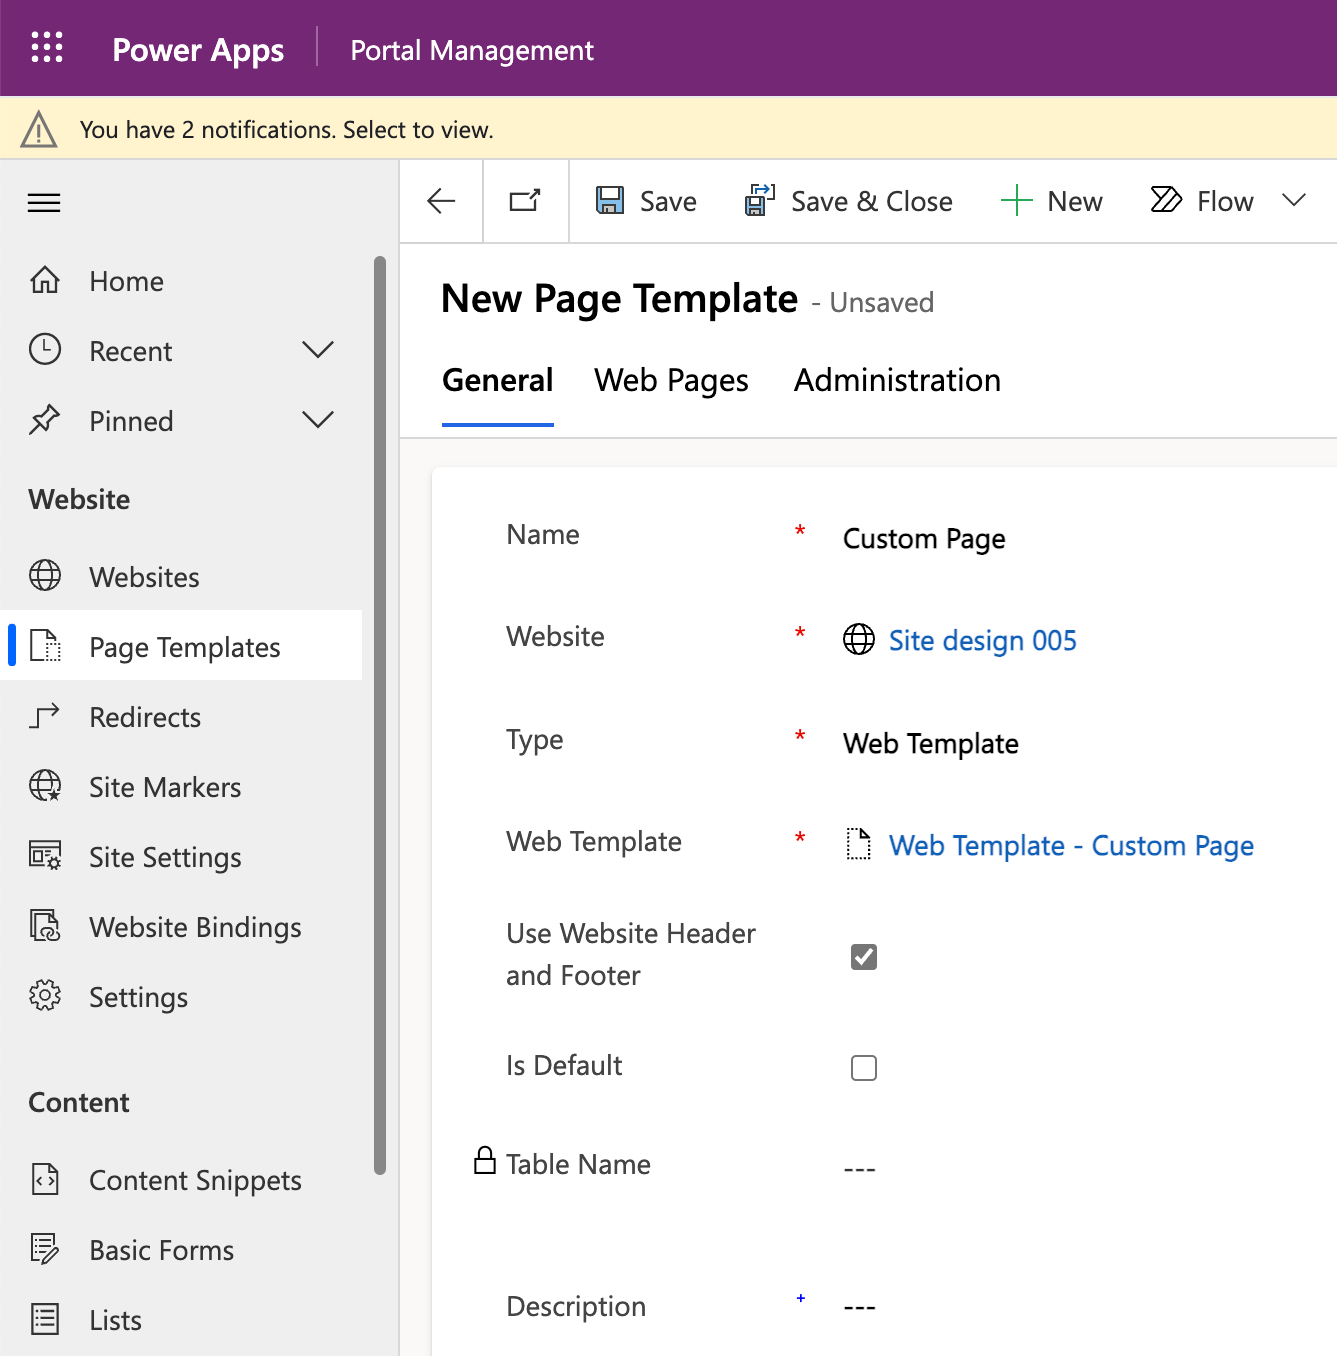 Figure 9: Create a page template in the Portal Management app